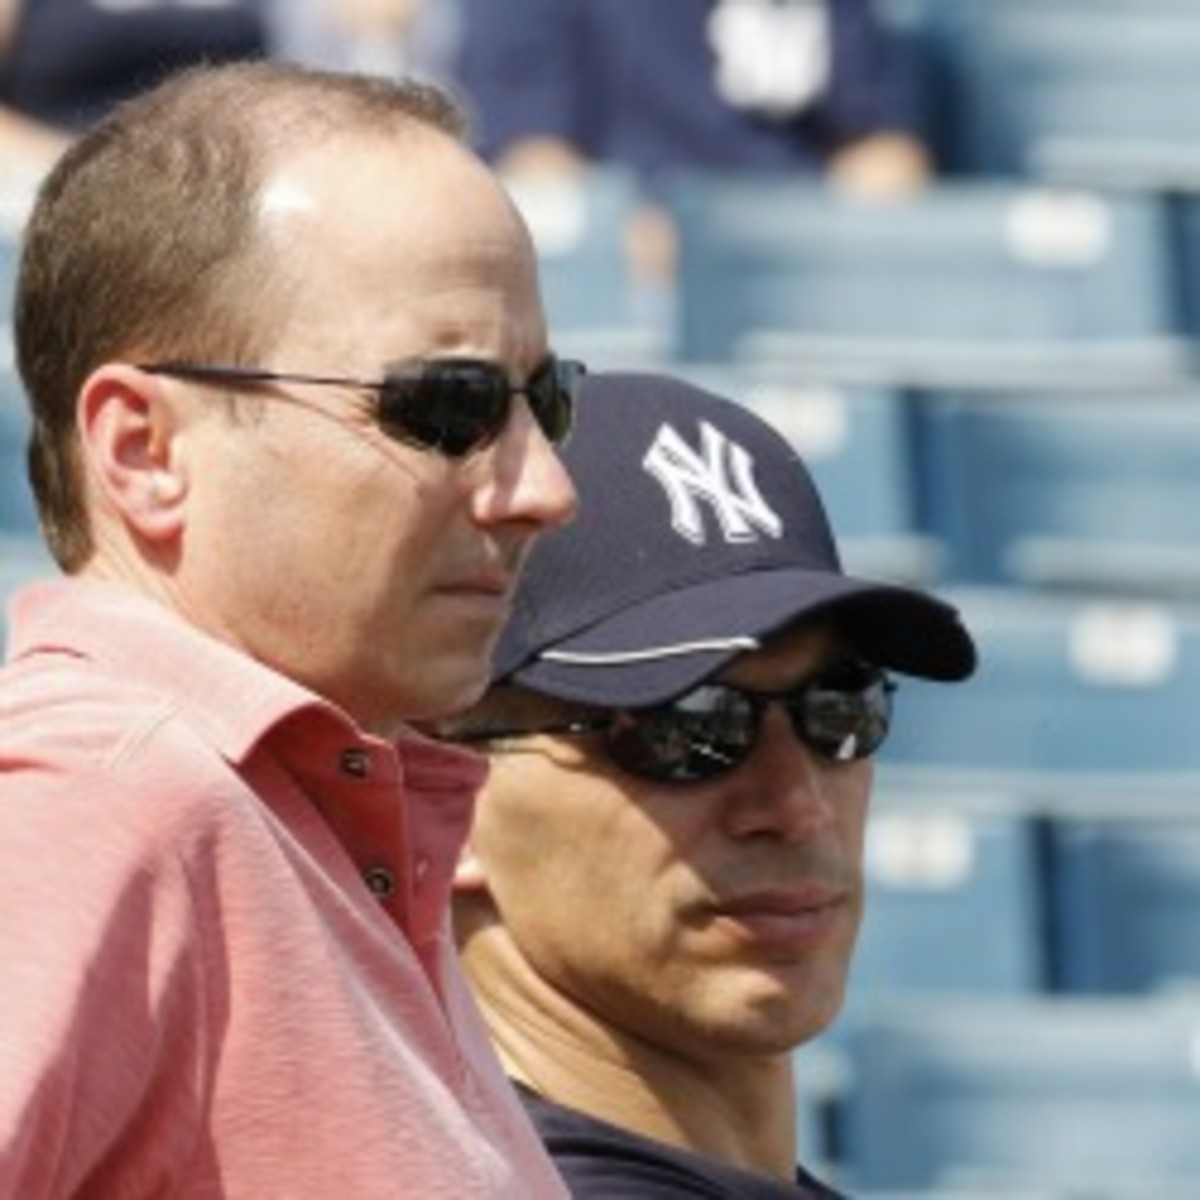 The New York Yankees are worth $2.3 billion, according to Forbes magazine. (Leon Halip/Getty Images)